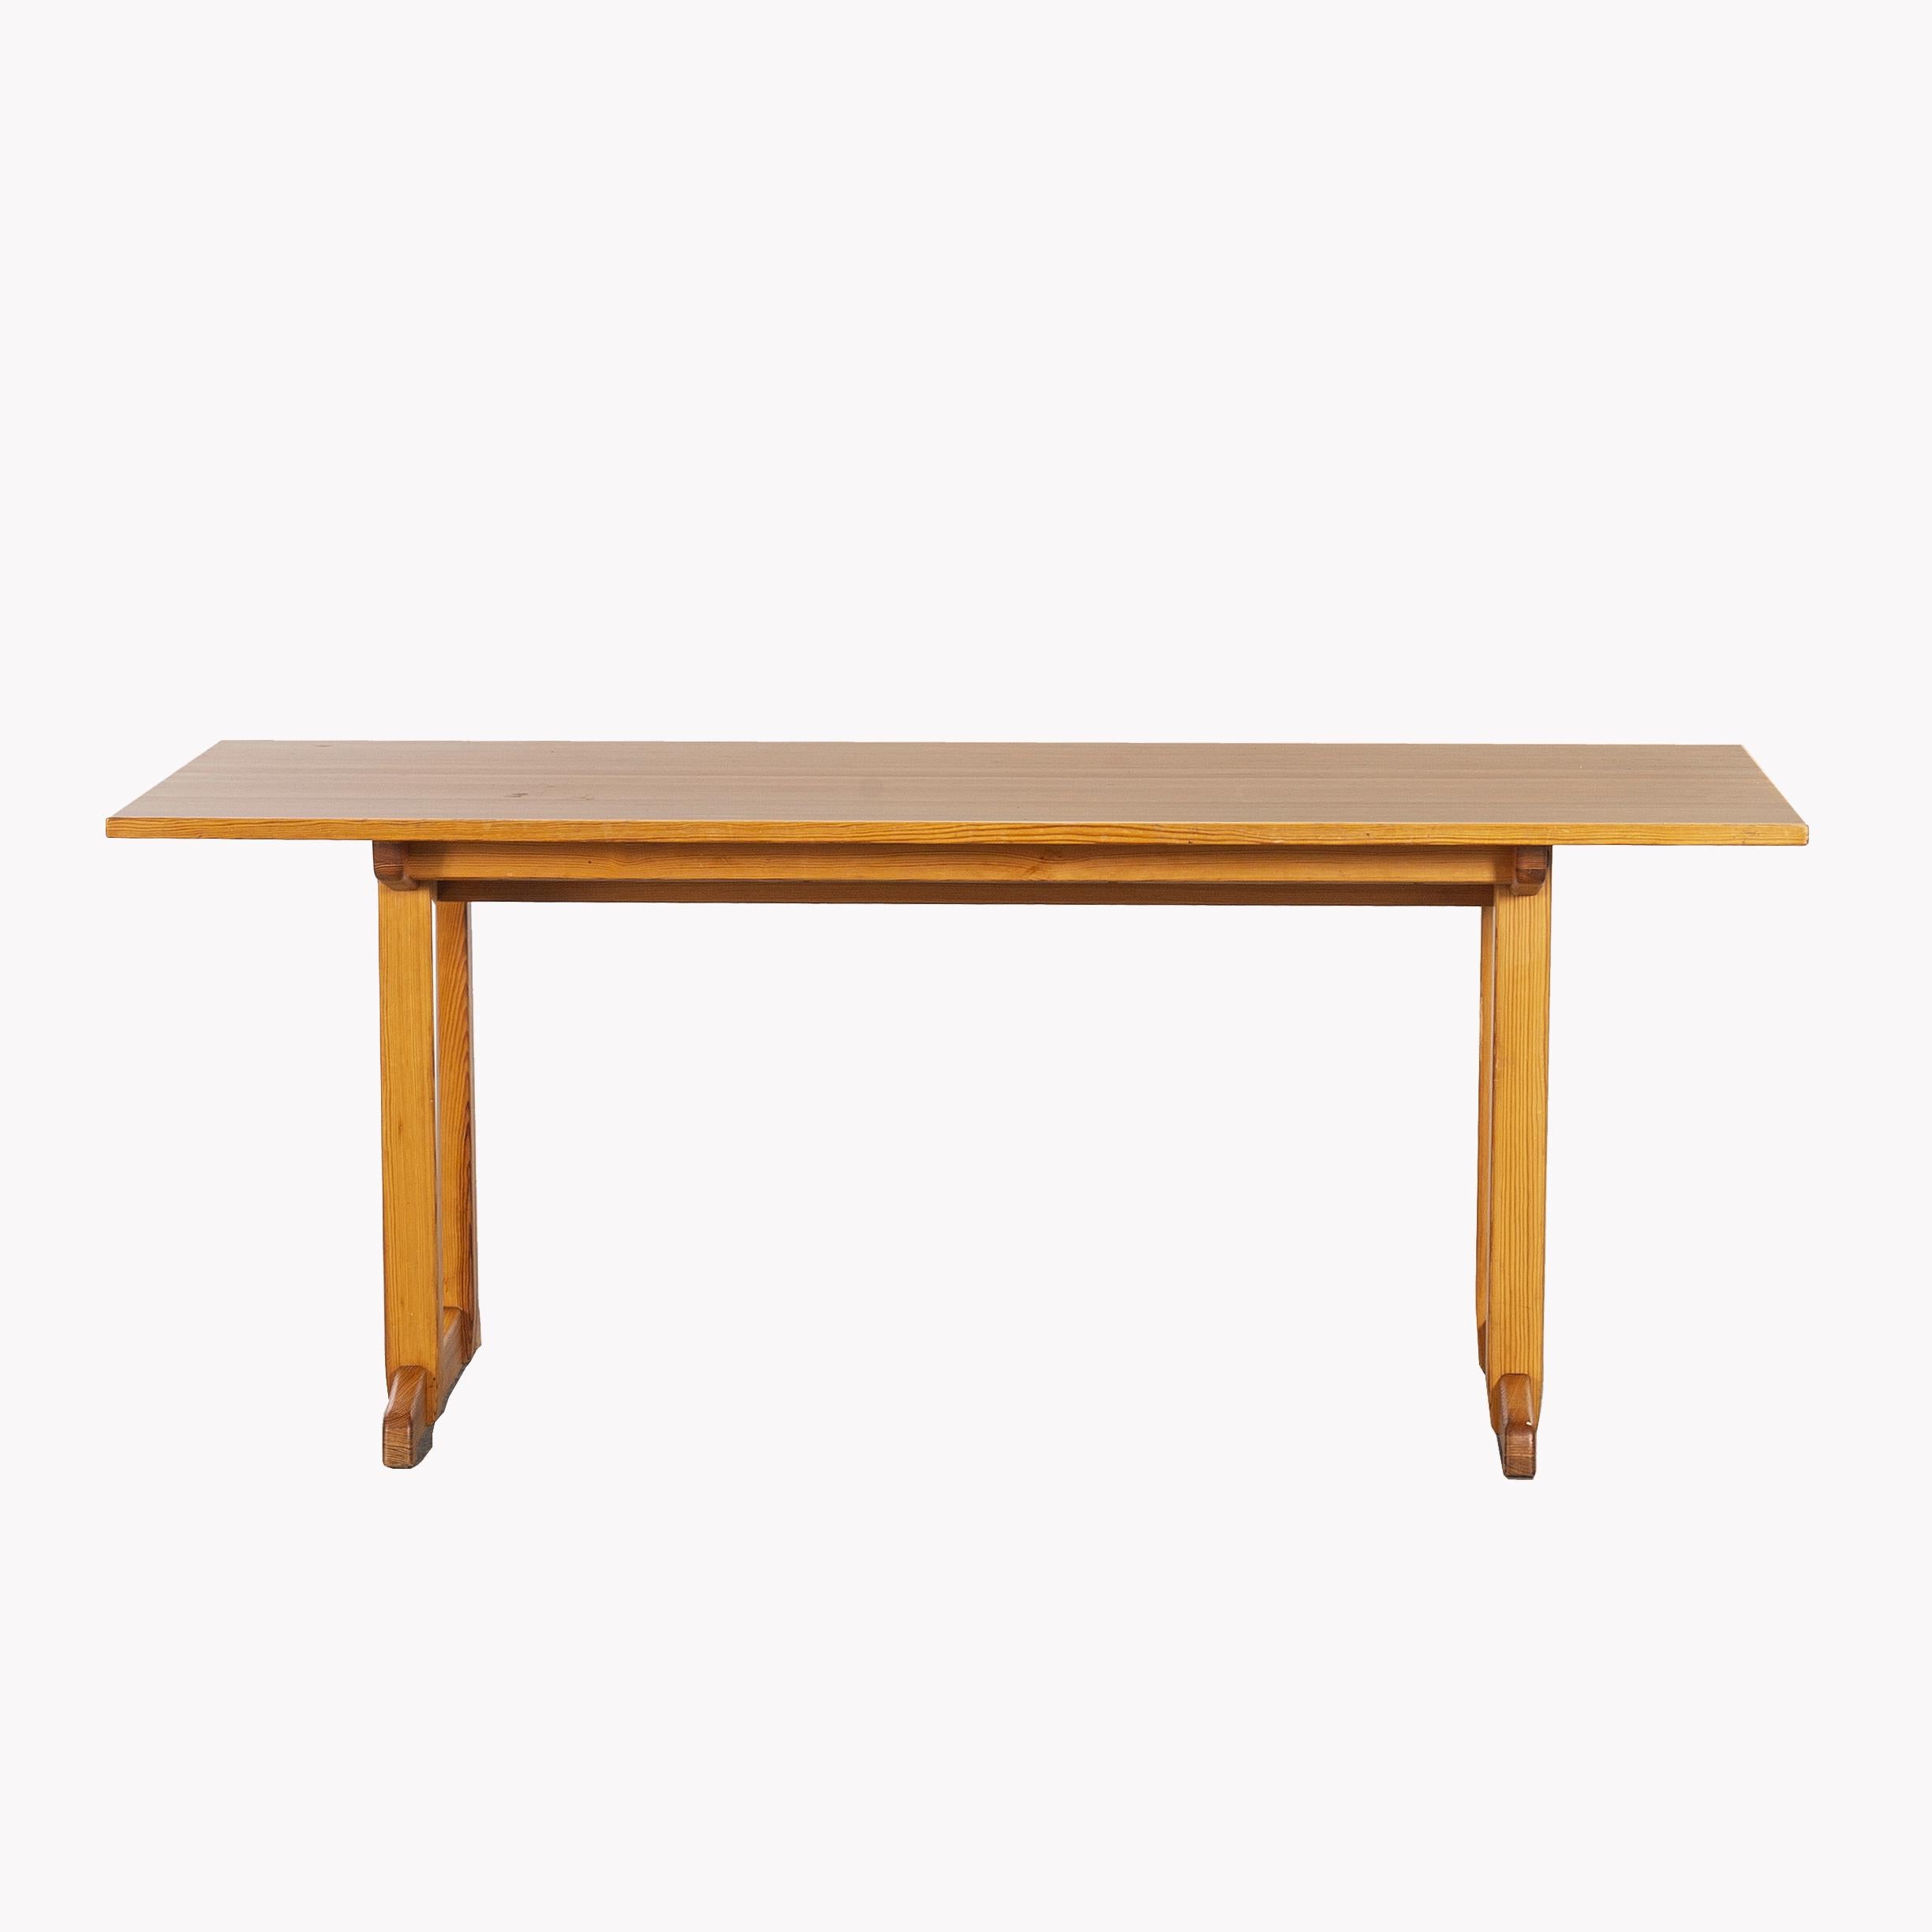 Carl Malmsten (Sweden, 1888-1972)

Visingsö

A rectangular pine wood dining table on four feet assembled by two on each side and joined by an arched base.
Sweden.
1960s.
 